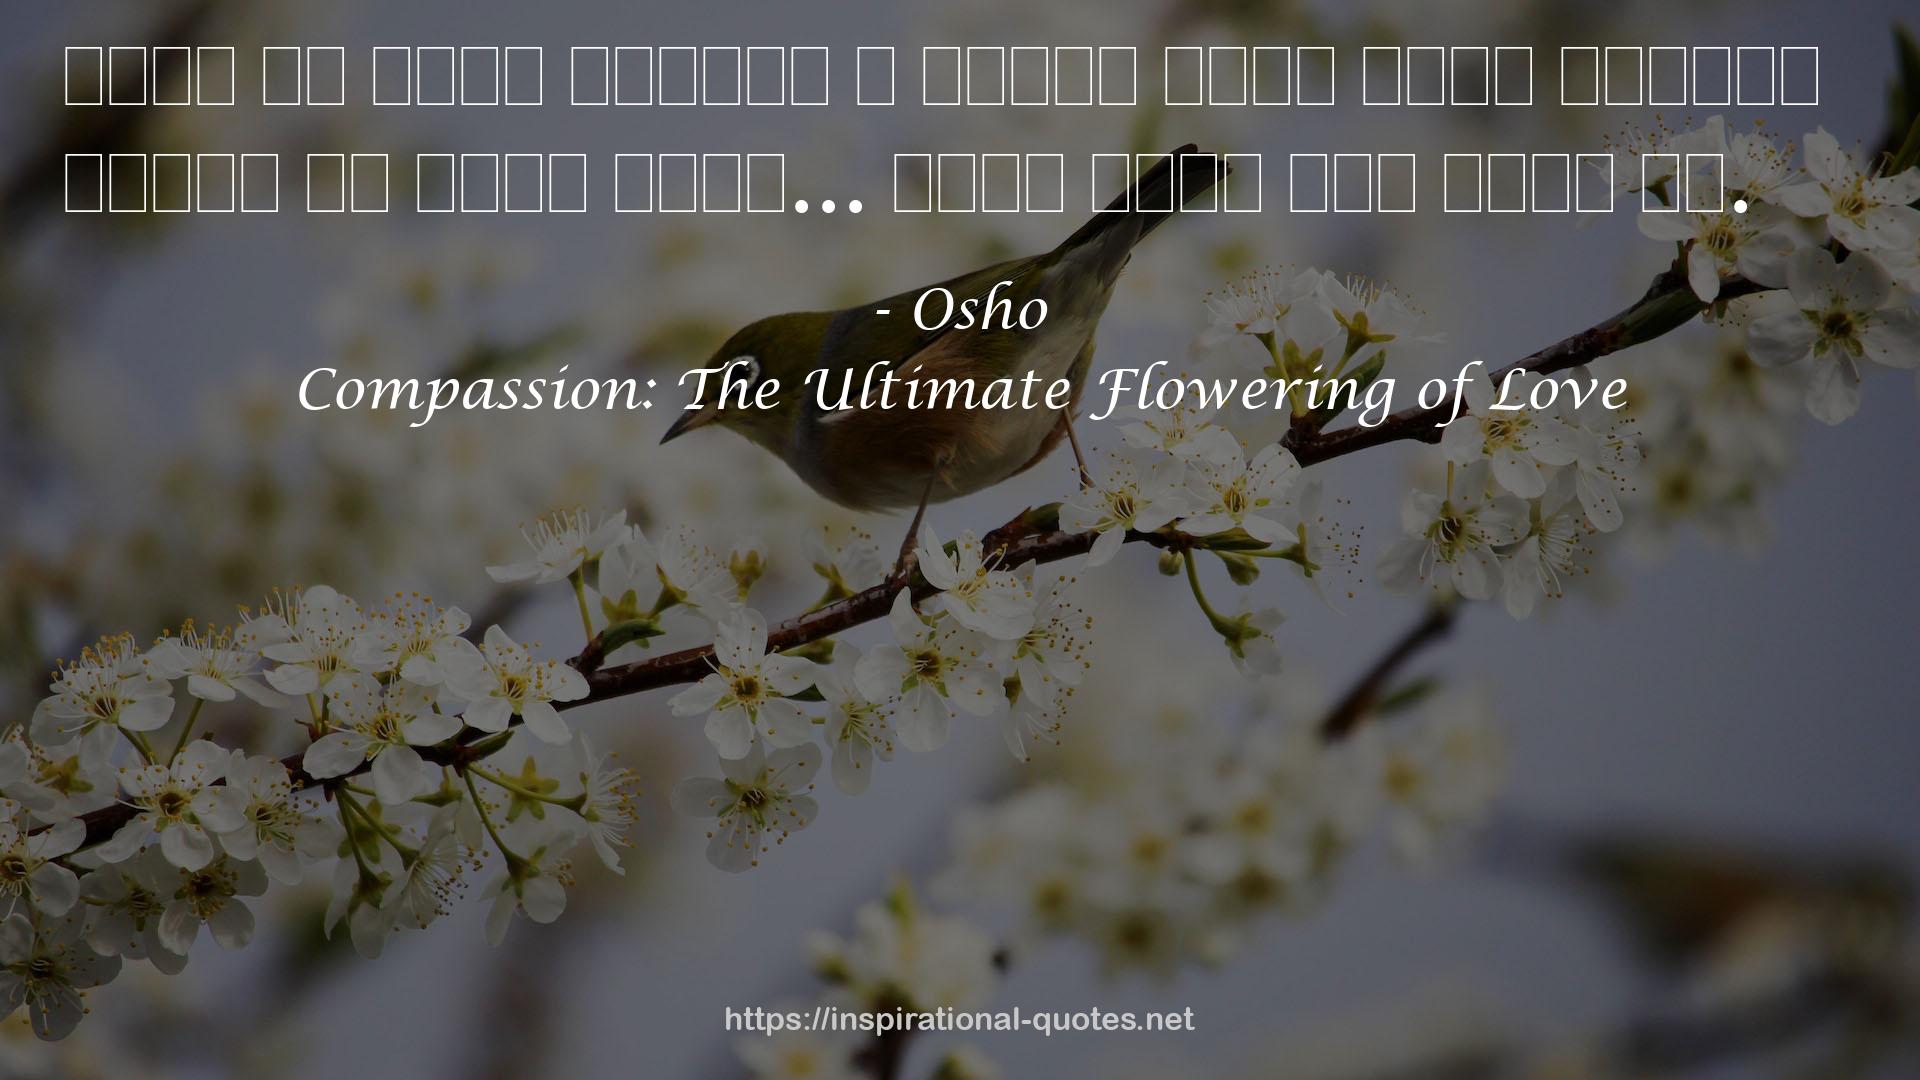 Compassion: The Ultimate Flowering of Love QUOTES